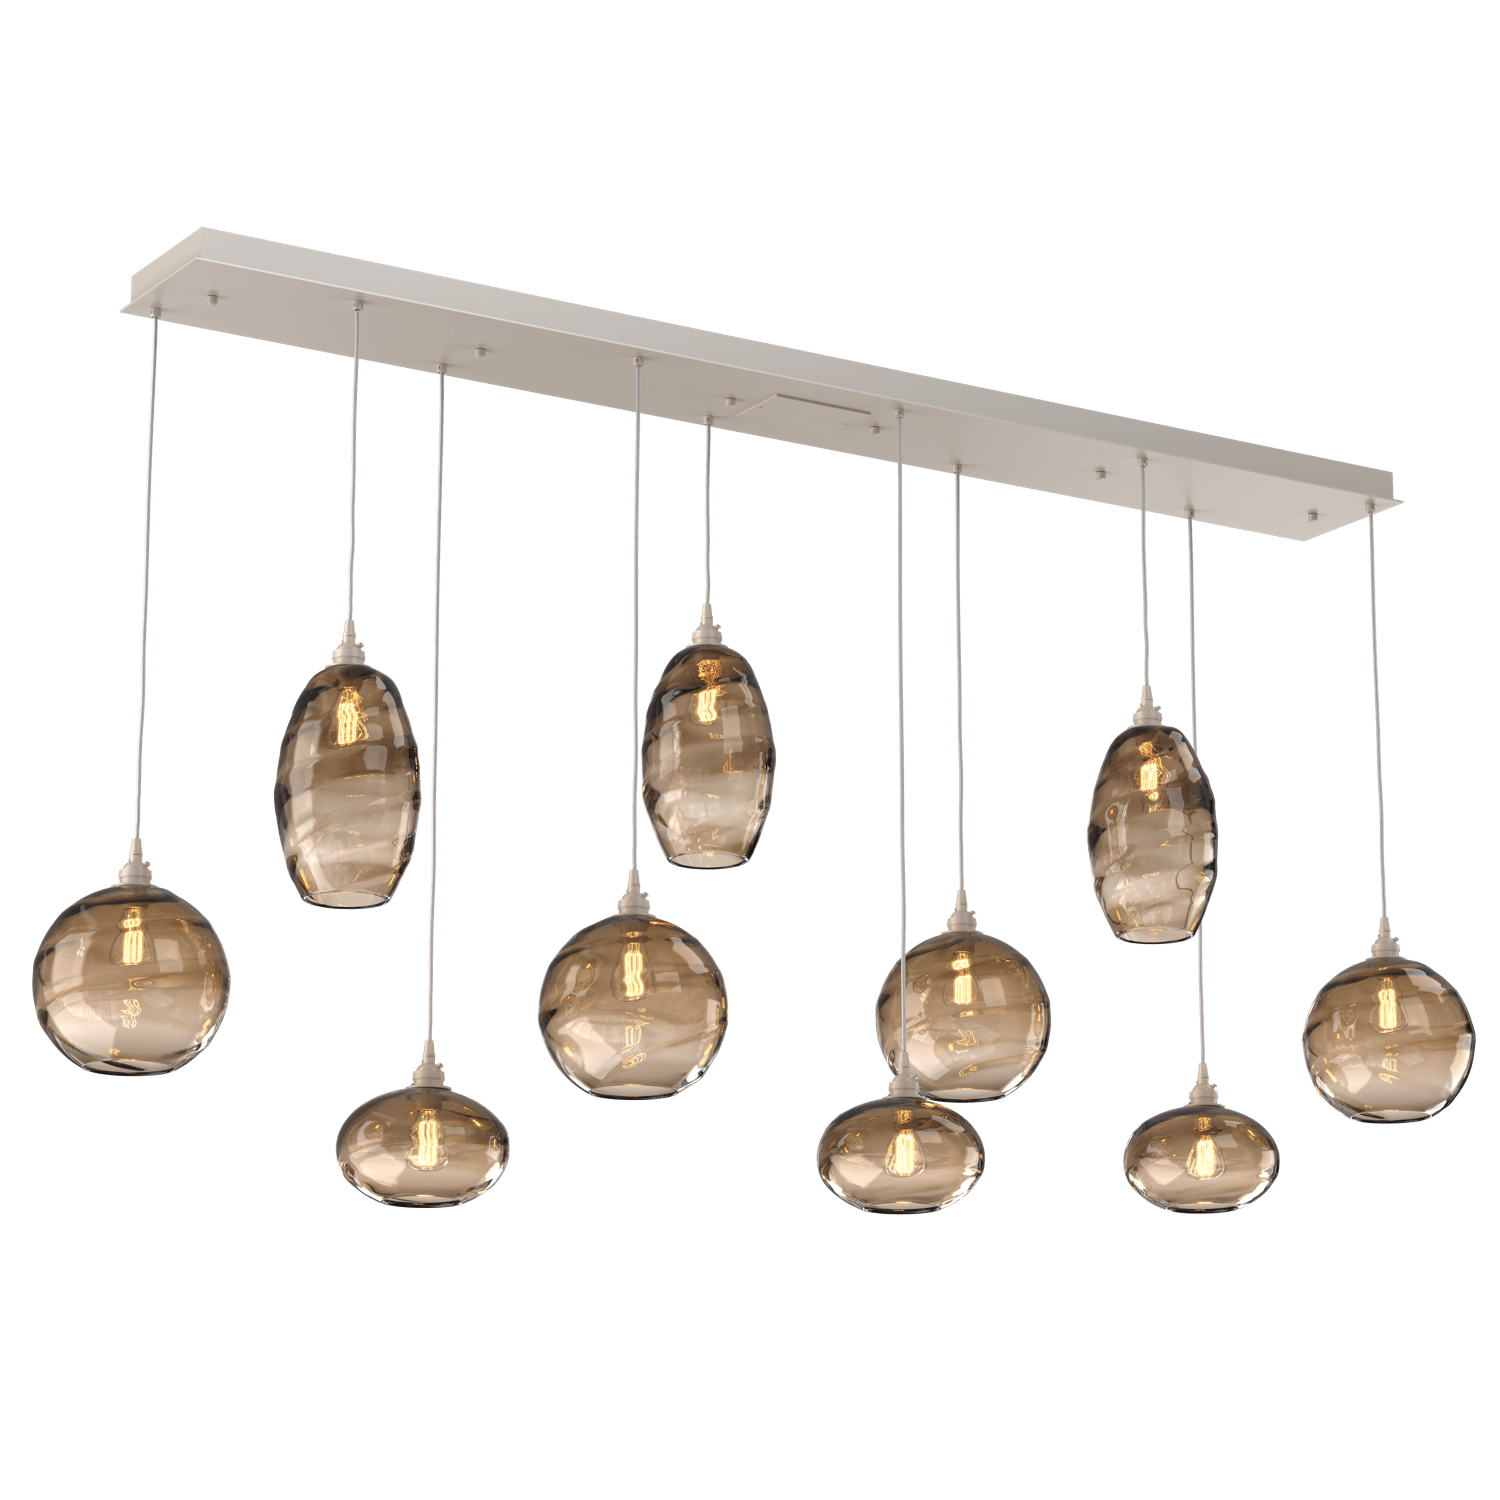 PLB0048-10-BS-OB-Hammerton-Studio-Optic-Blown-Glass-Misto-10-light-linear-pendant-chandelier-with-metallic-beige-silver-finish-and-optic-bronze-blown-glass-shades-and-incandescent-lamping